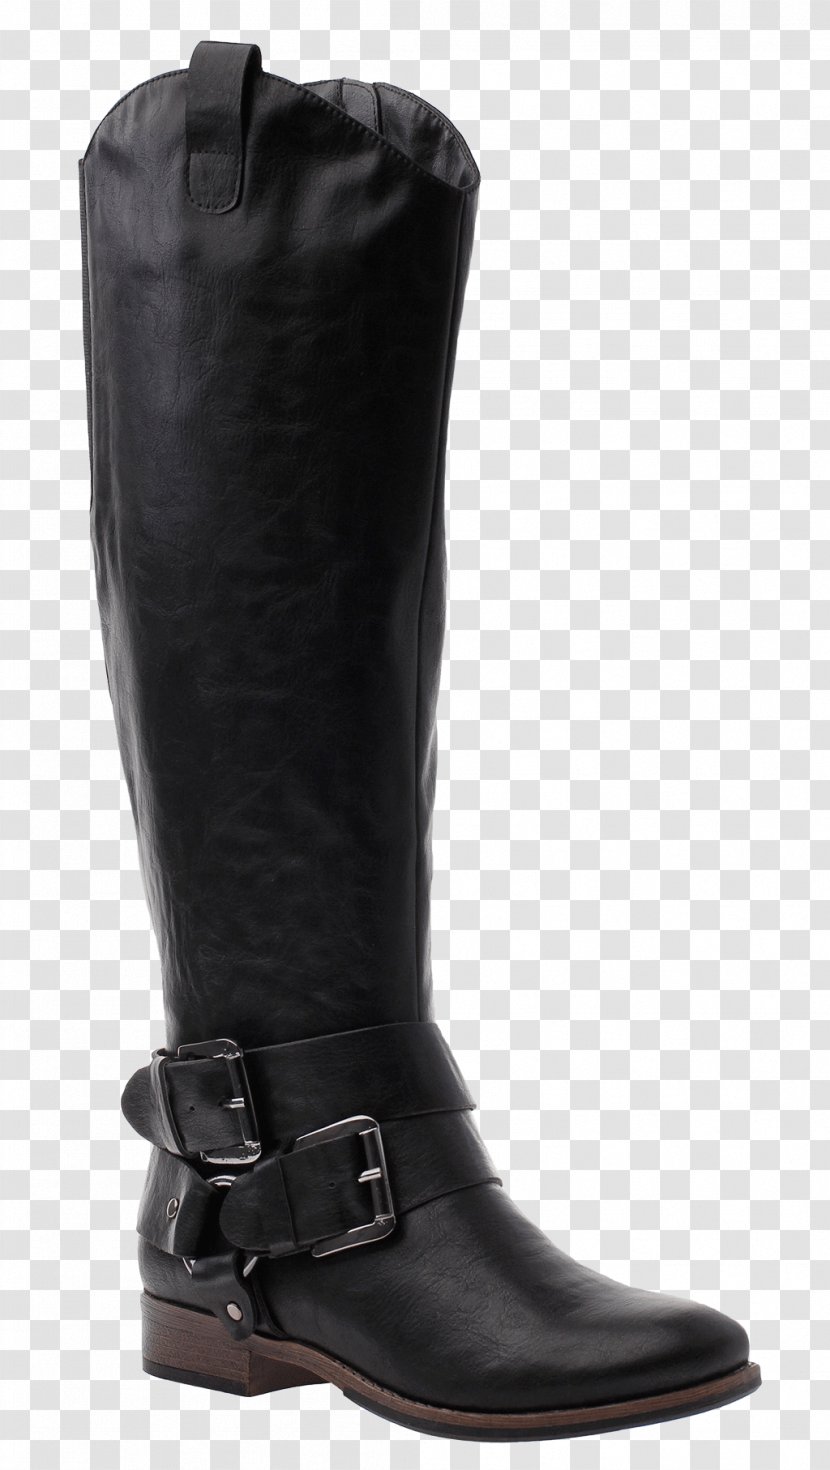 Riding Boot Shoe Knee-high Leather Transparent PNG